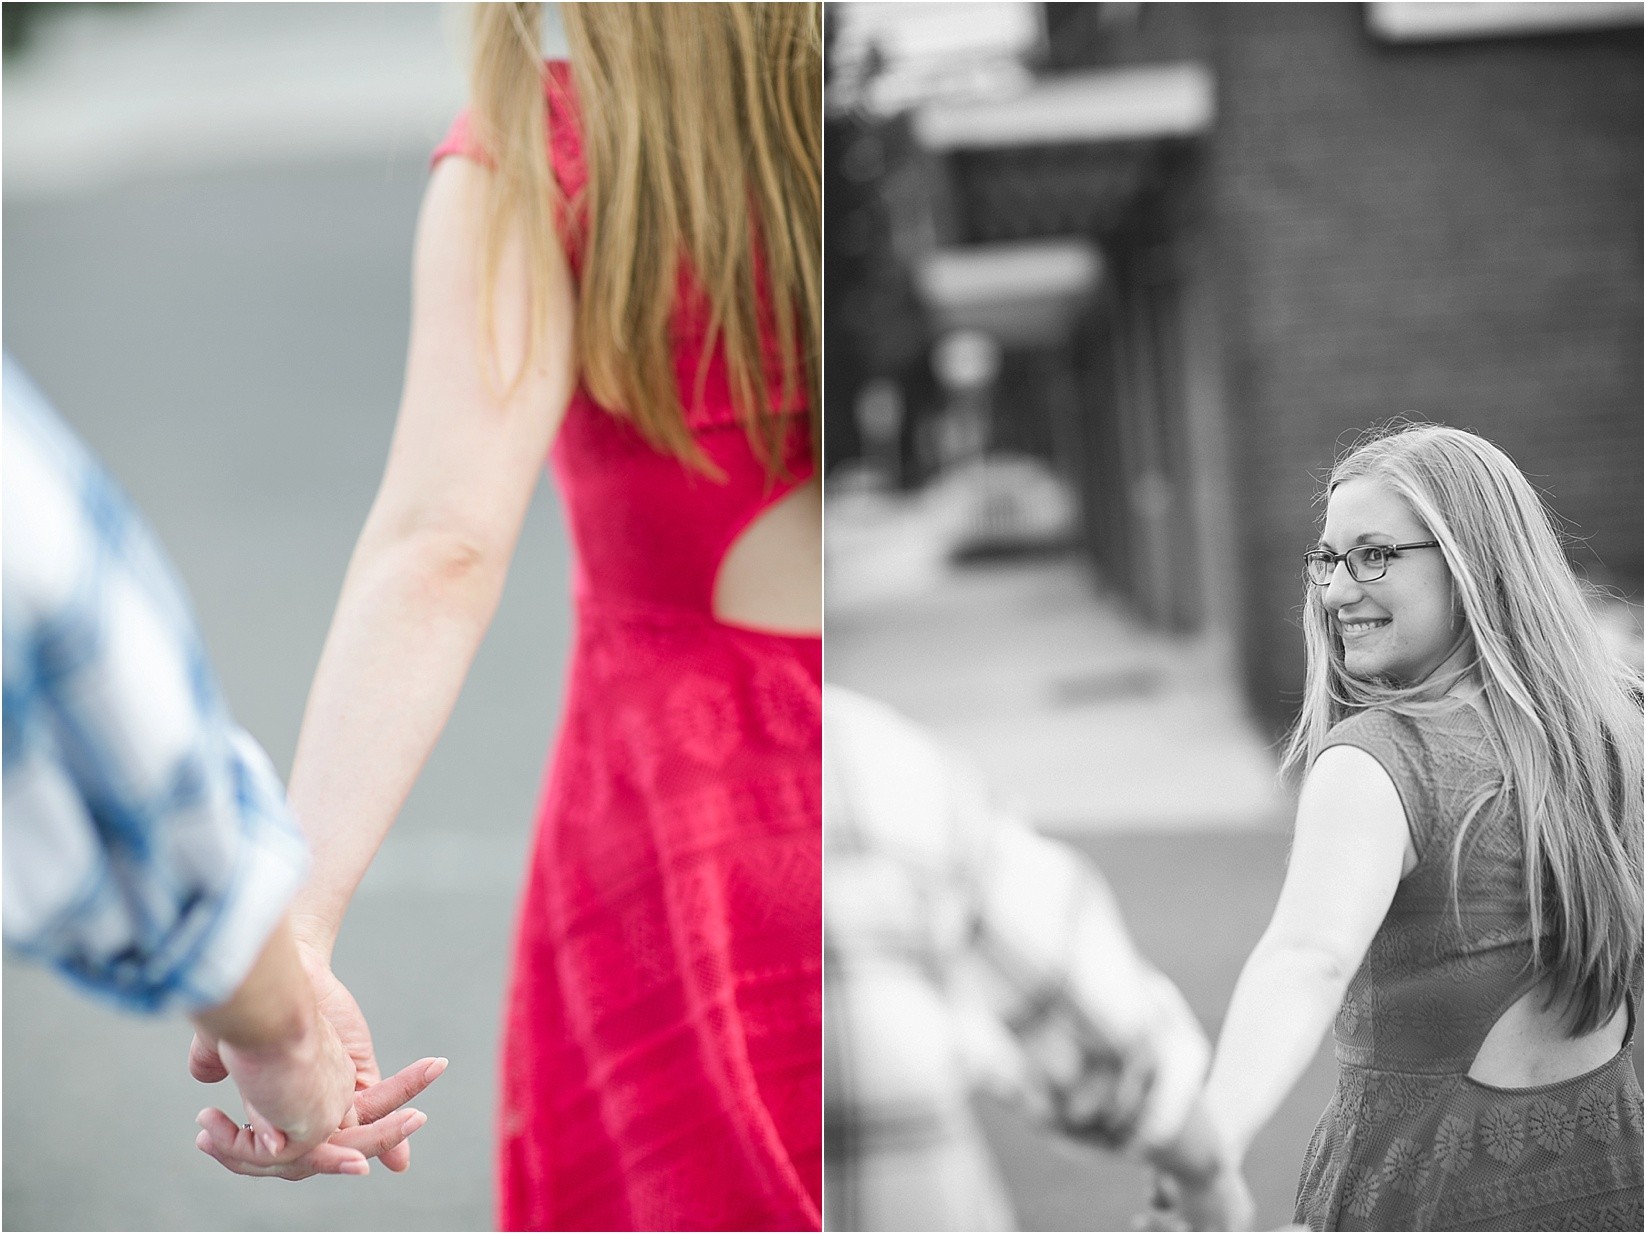 Walking hand and hand during Andria & Matts Mount Pleasant engagement session in downtown mount pleasant nc